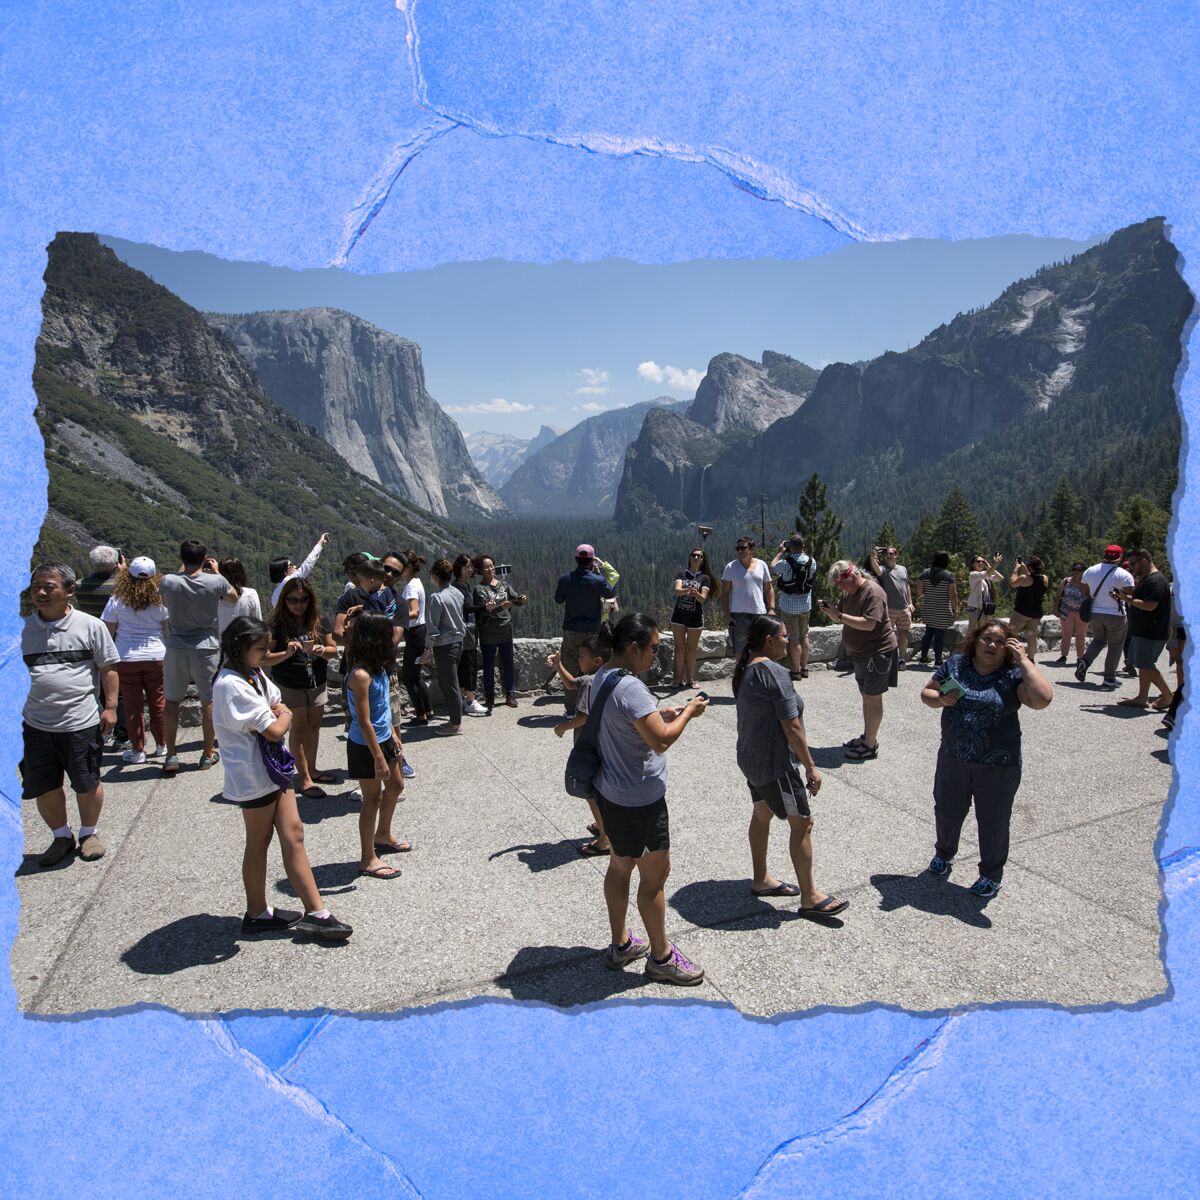 A crowd of people at Yosemite National Park.